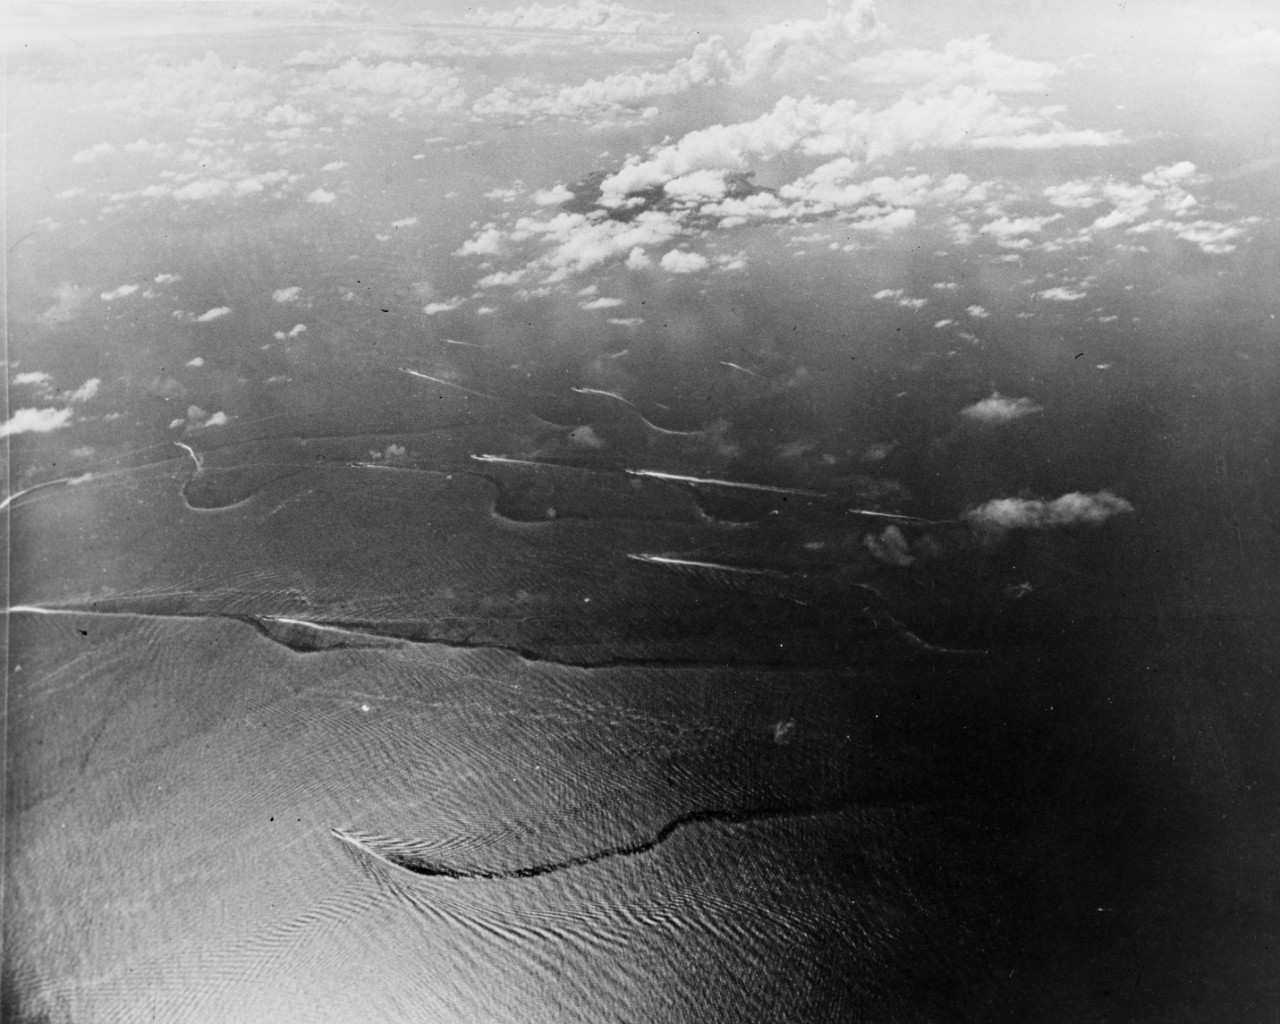 Japanese fleet in the Tablas Strait, during the Battle of Leyte Gulf, 24 October 1944. Taken by a plane from a USS Intrepid (CV-11).